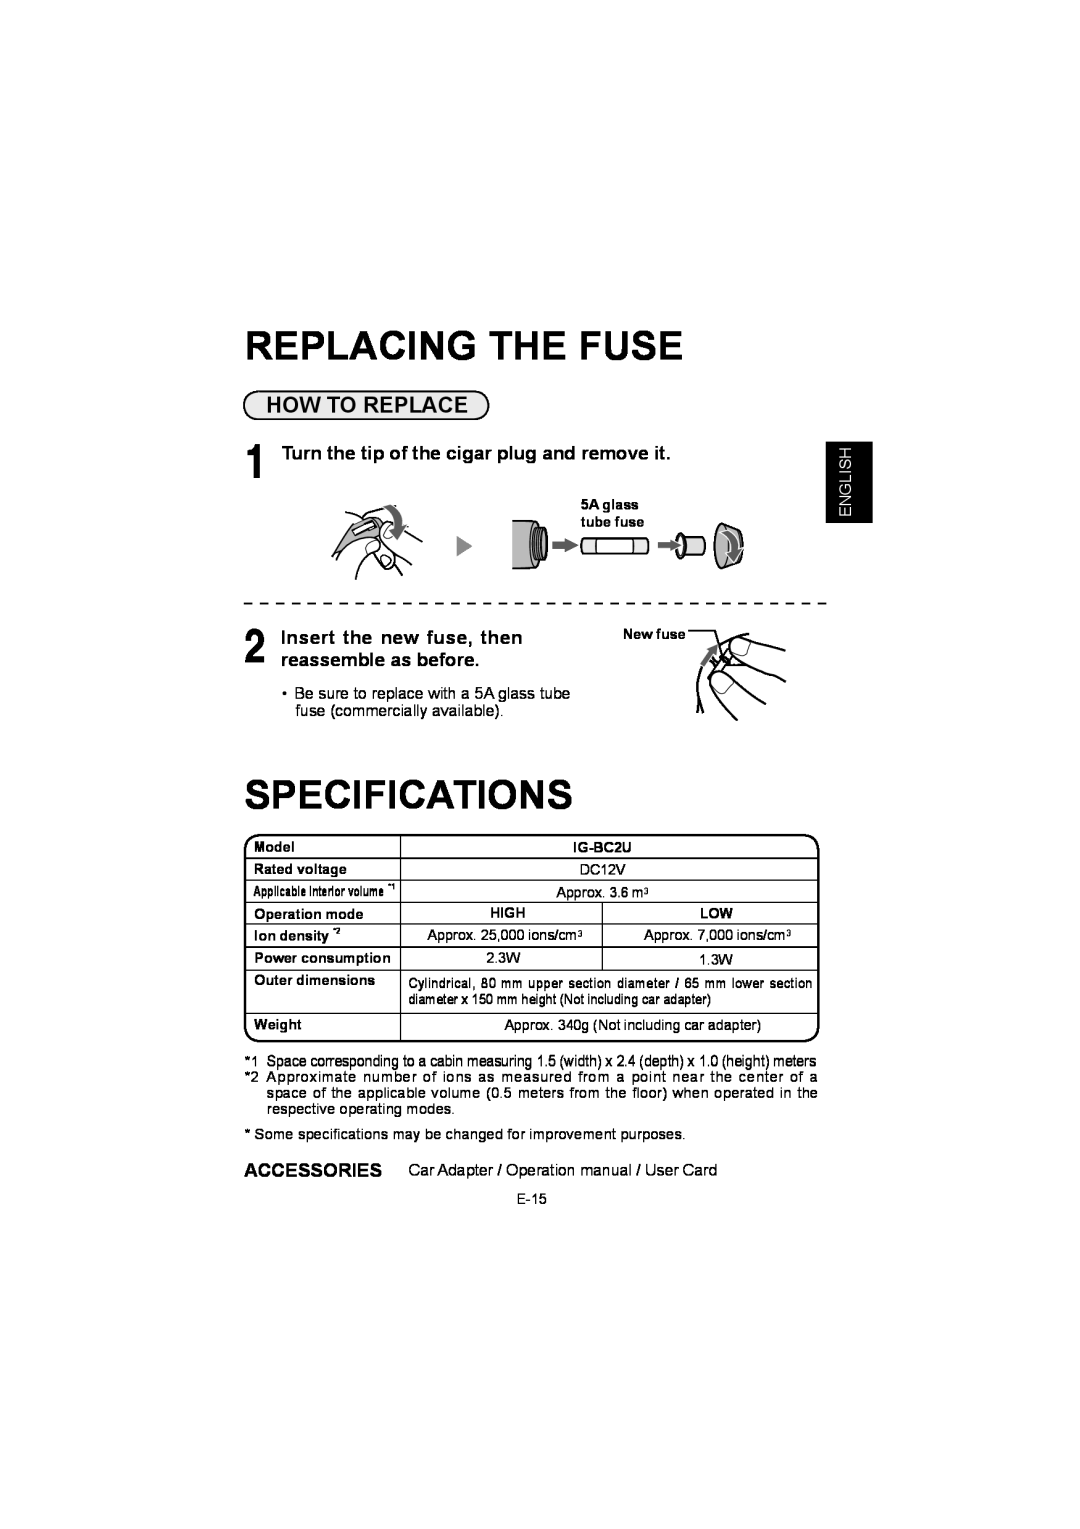 Sharp IG-BC2UB manuel dutilisation Replacing The Fuse, Specifications, How To Replace, English 